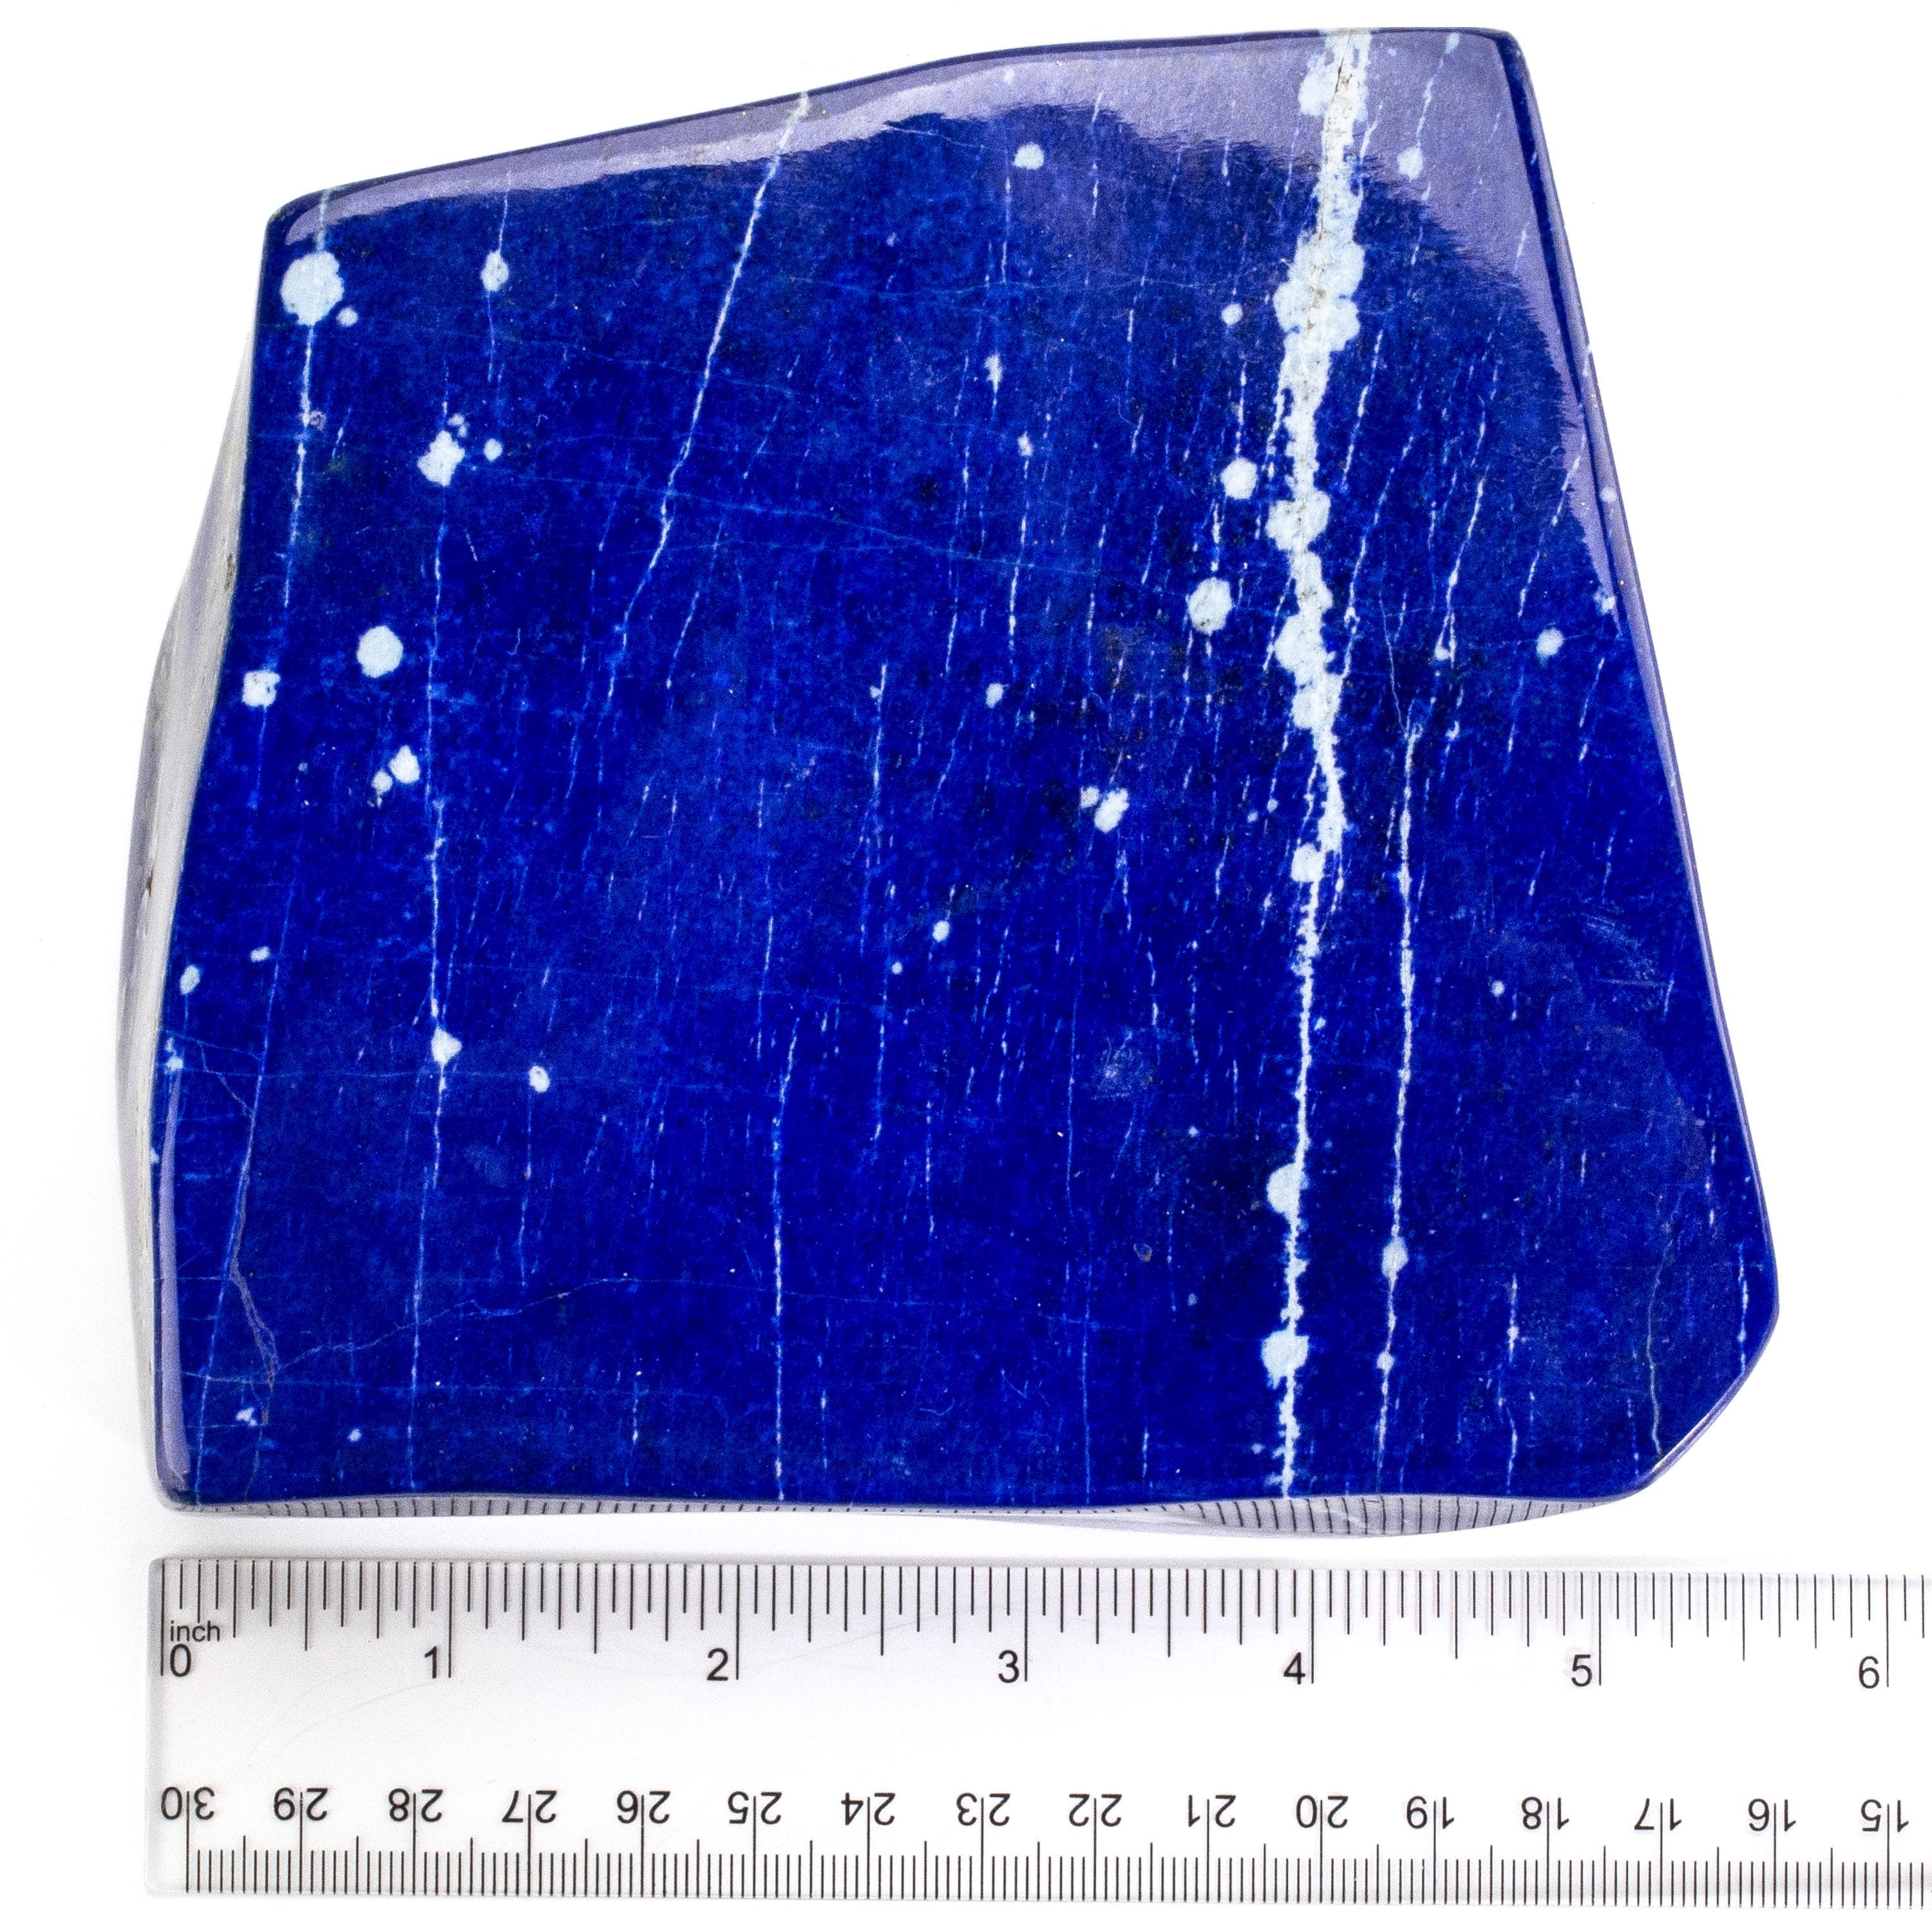 Kalifano Lapis Lapis Lazuil Freeform from Afghanistan - 1.6 kg / 3.5 lbs LP1700.001